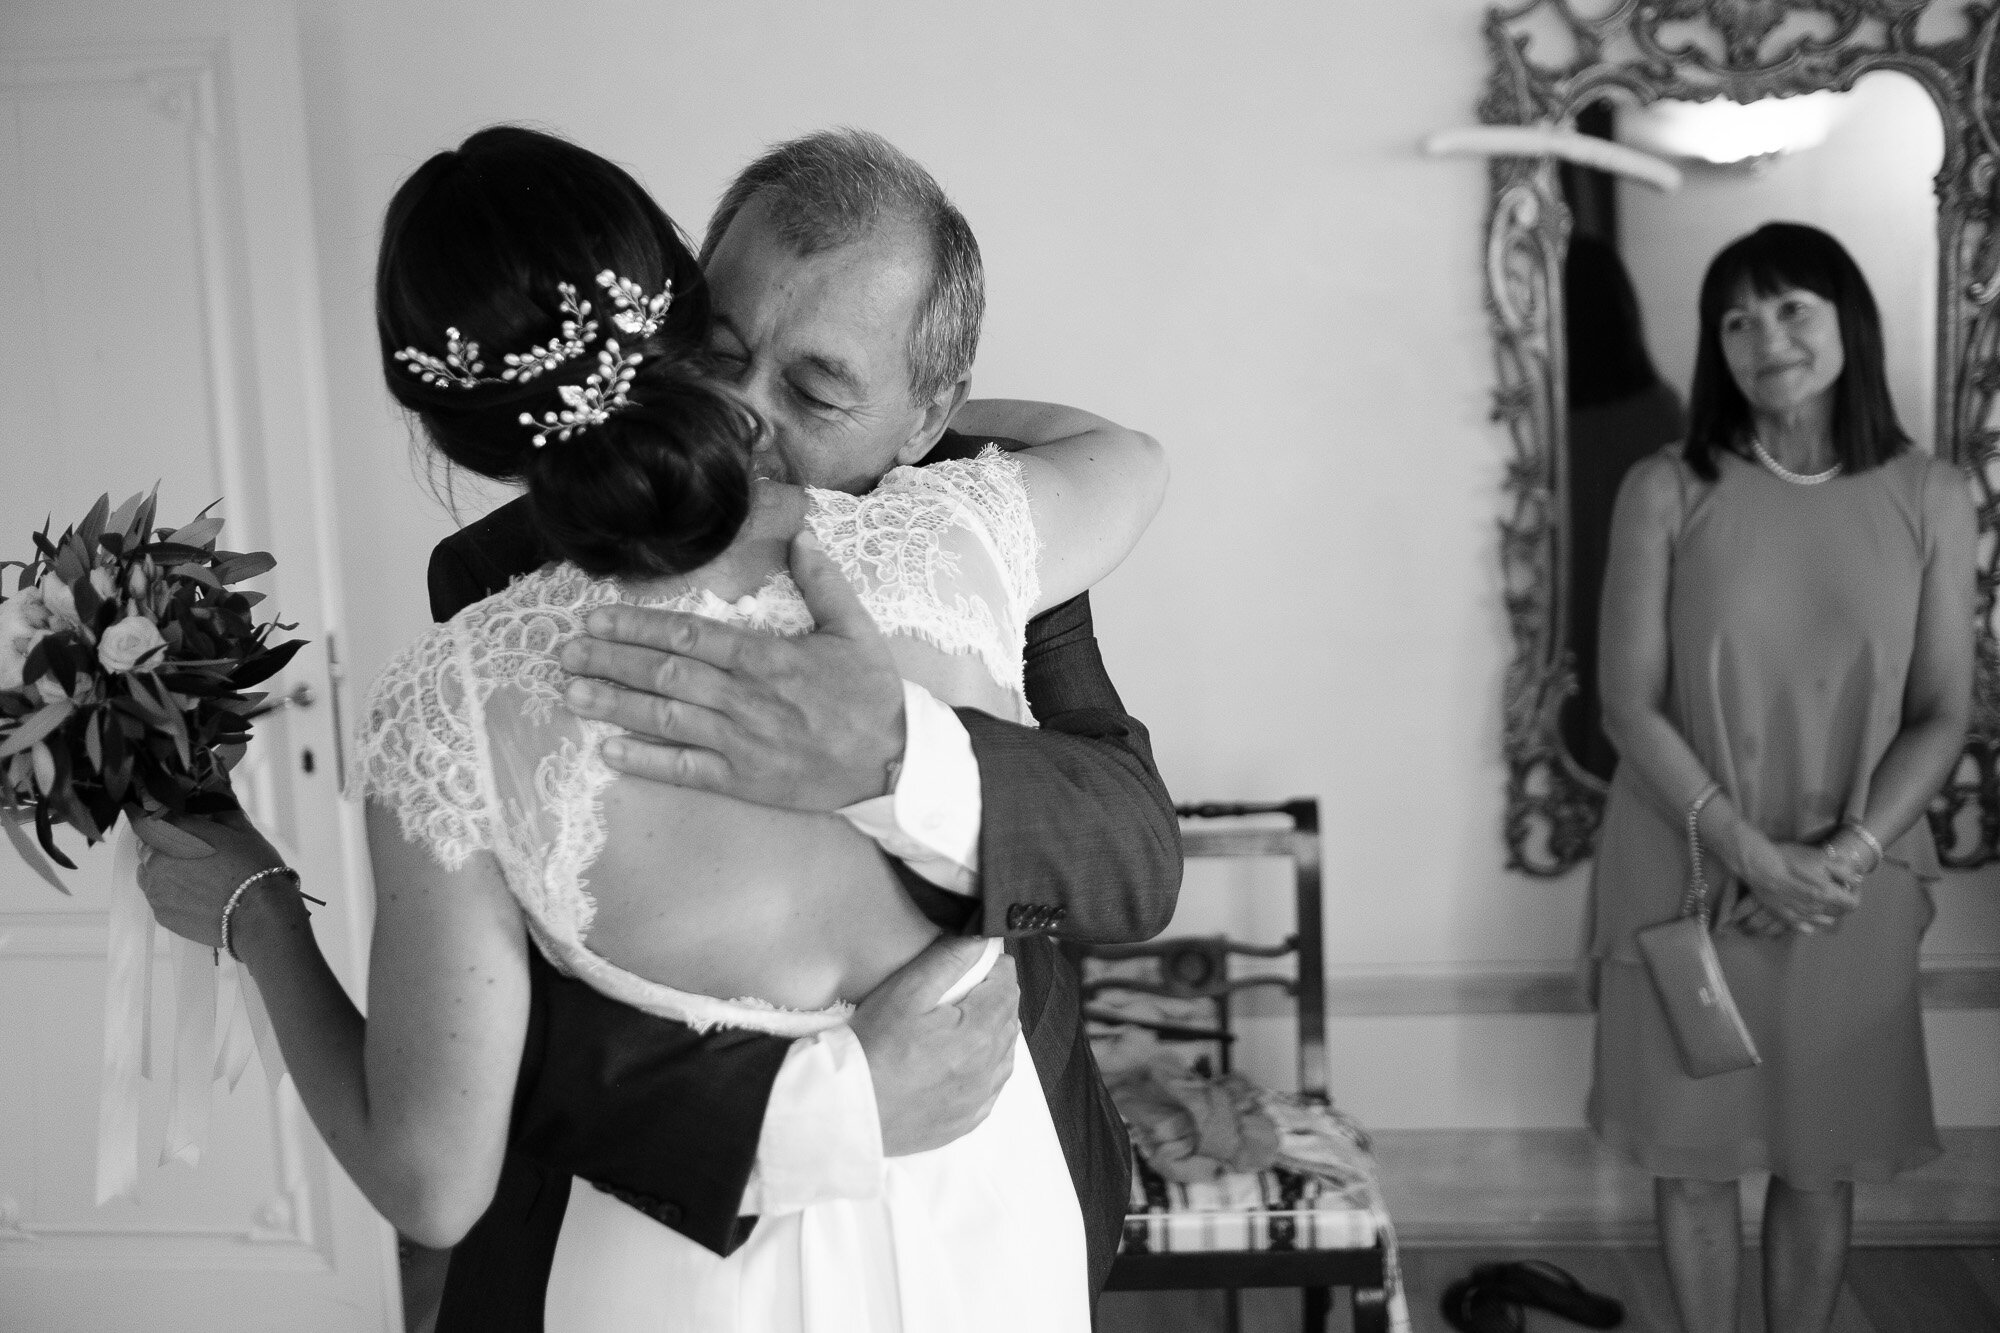  Elena receives a hug from her dad after seeing her for the first time in her wedding dress before the wedding ceremony at their destination wedding in Tuscany, Italy by wedding photographer Scott Williams (www.scottwilliamsphotographer.com) 